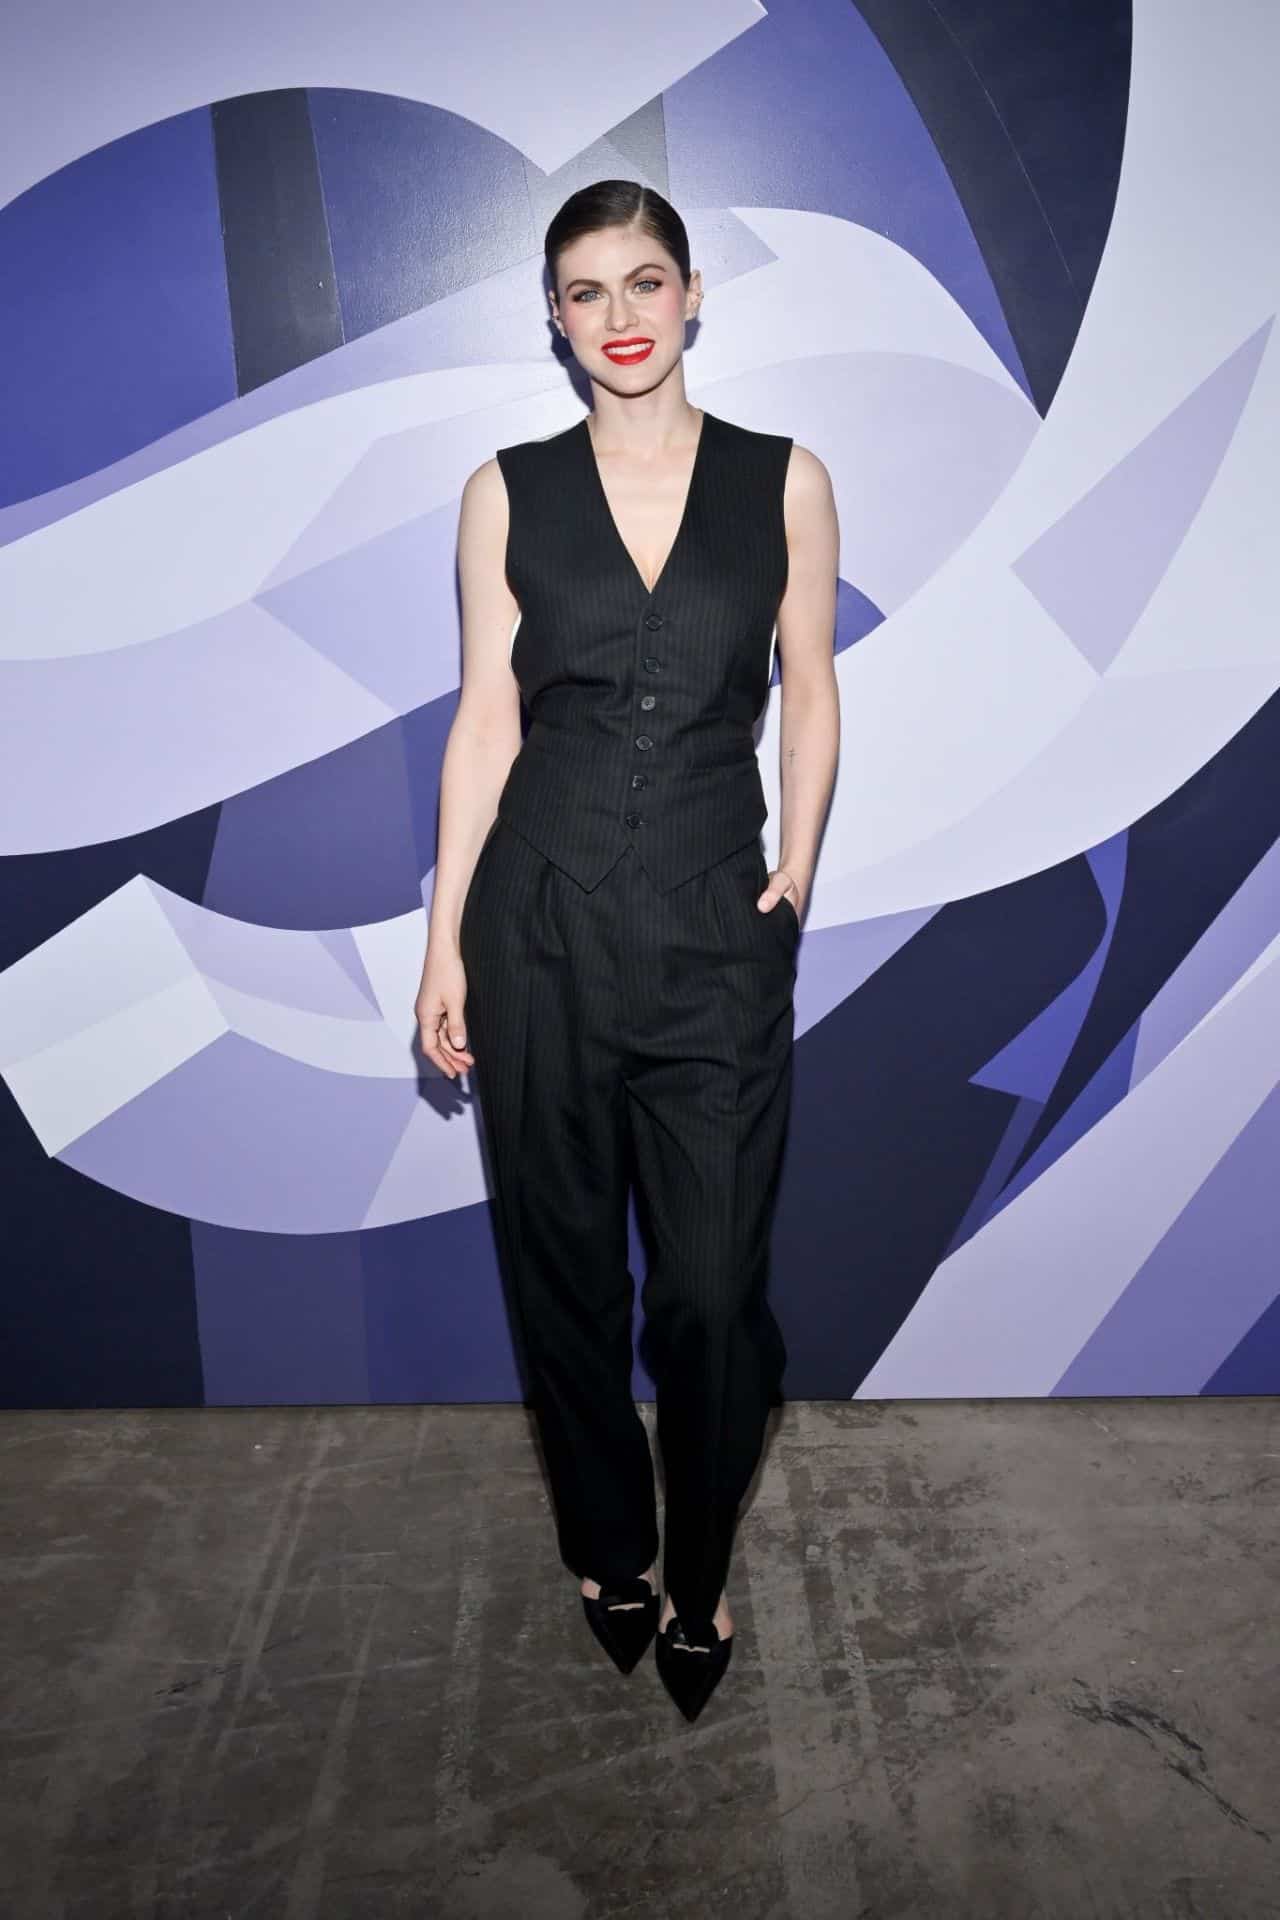 Alexandra Daddario Wears a Stylish Look at the Gris Dior VIP Party